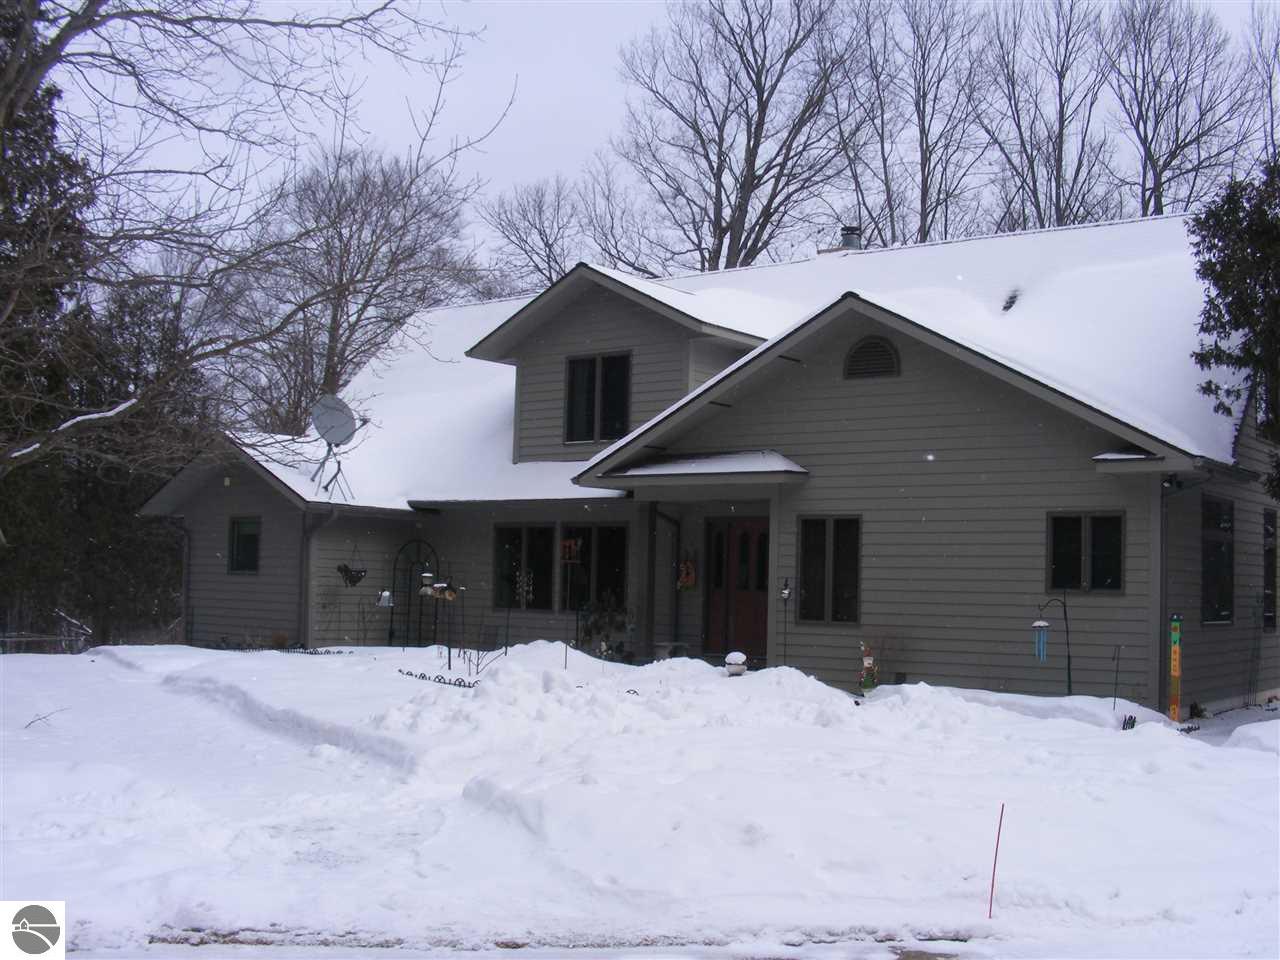 5018 N Raymond Road, Luther, MI 49656 photo 1 of 68